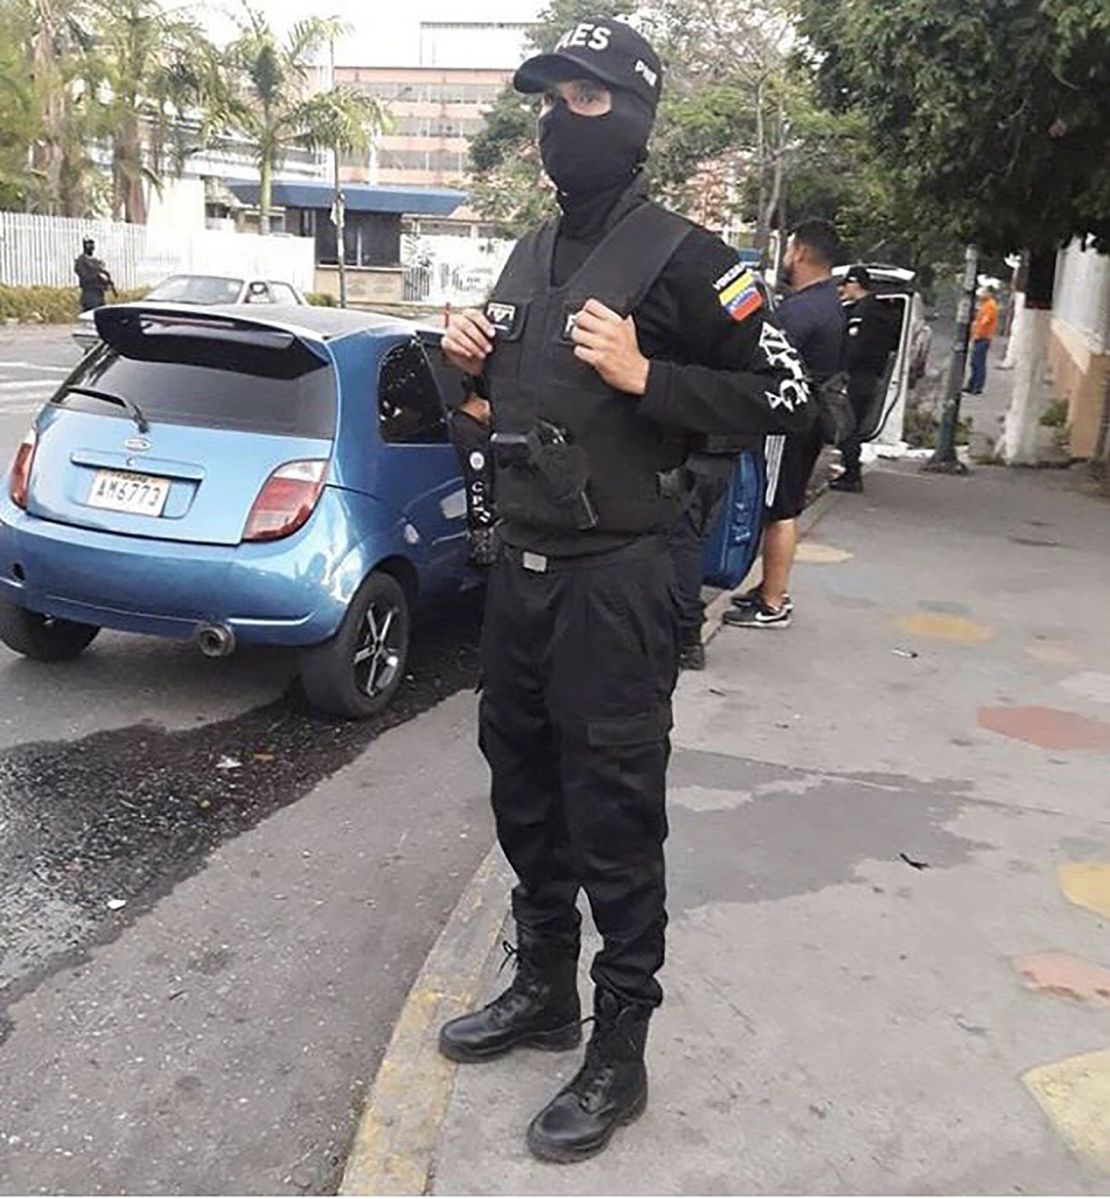 Image of William in uniform when he was on duty and active in Venezuela, before he deserted.